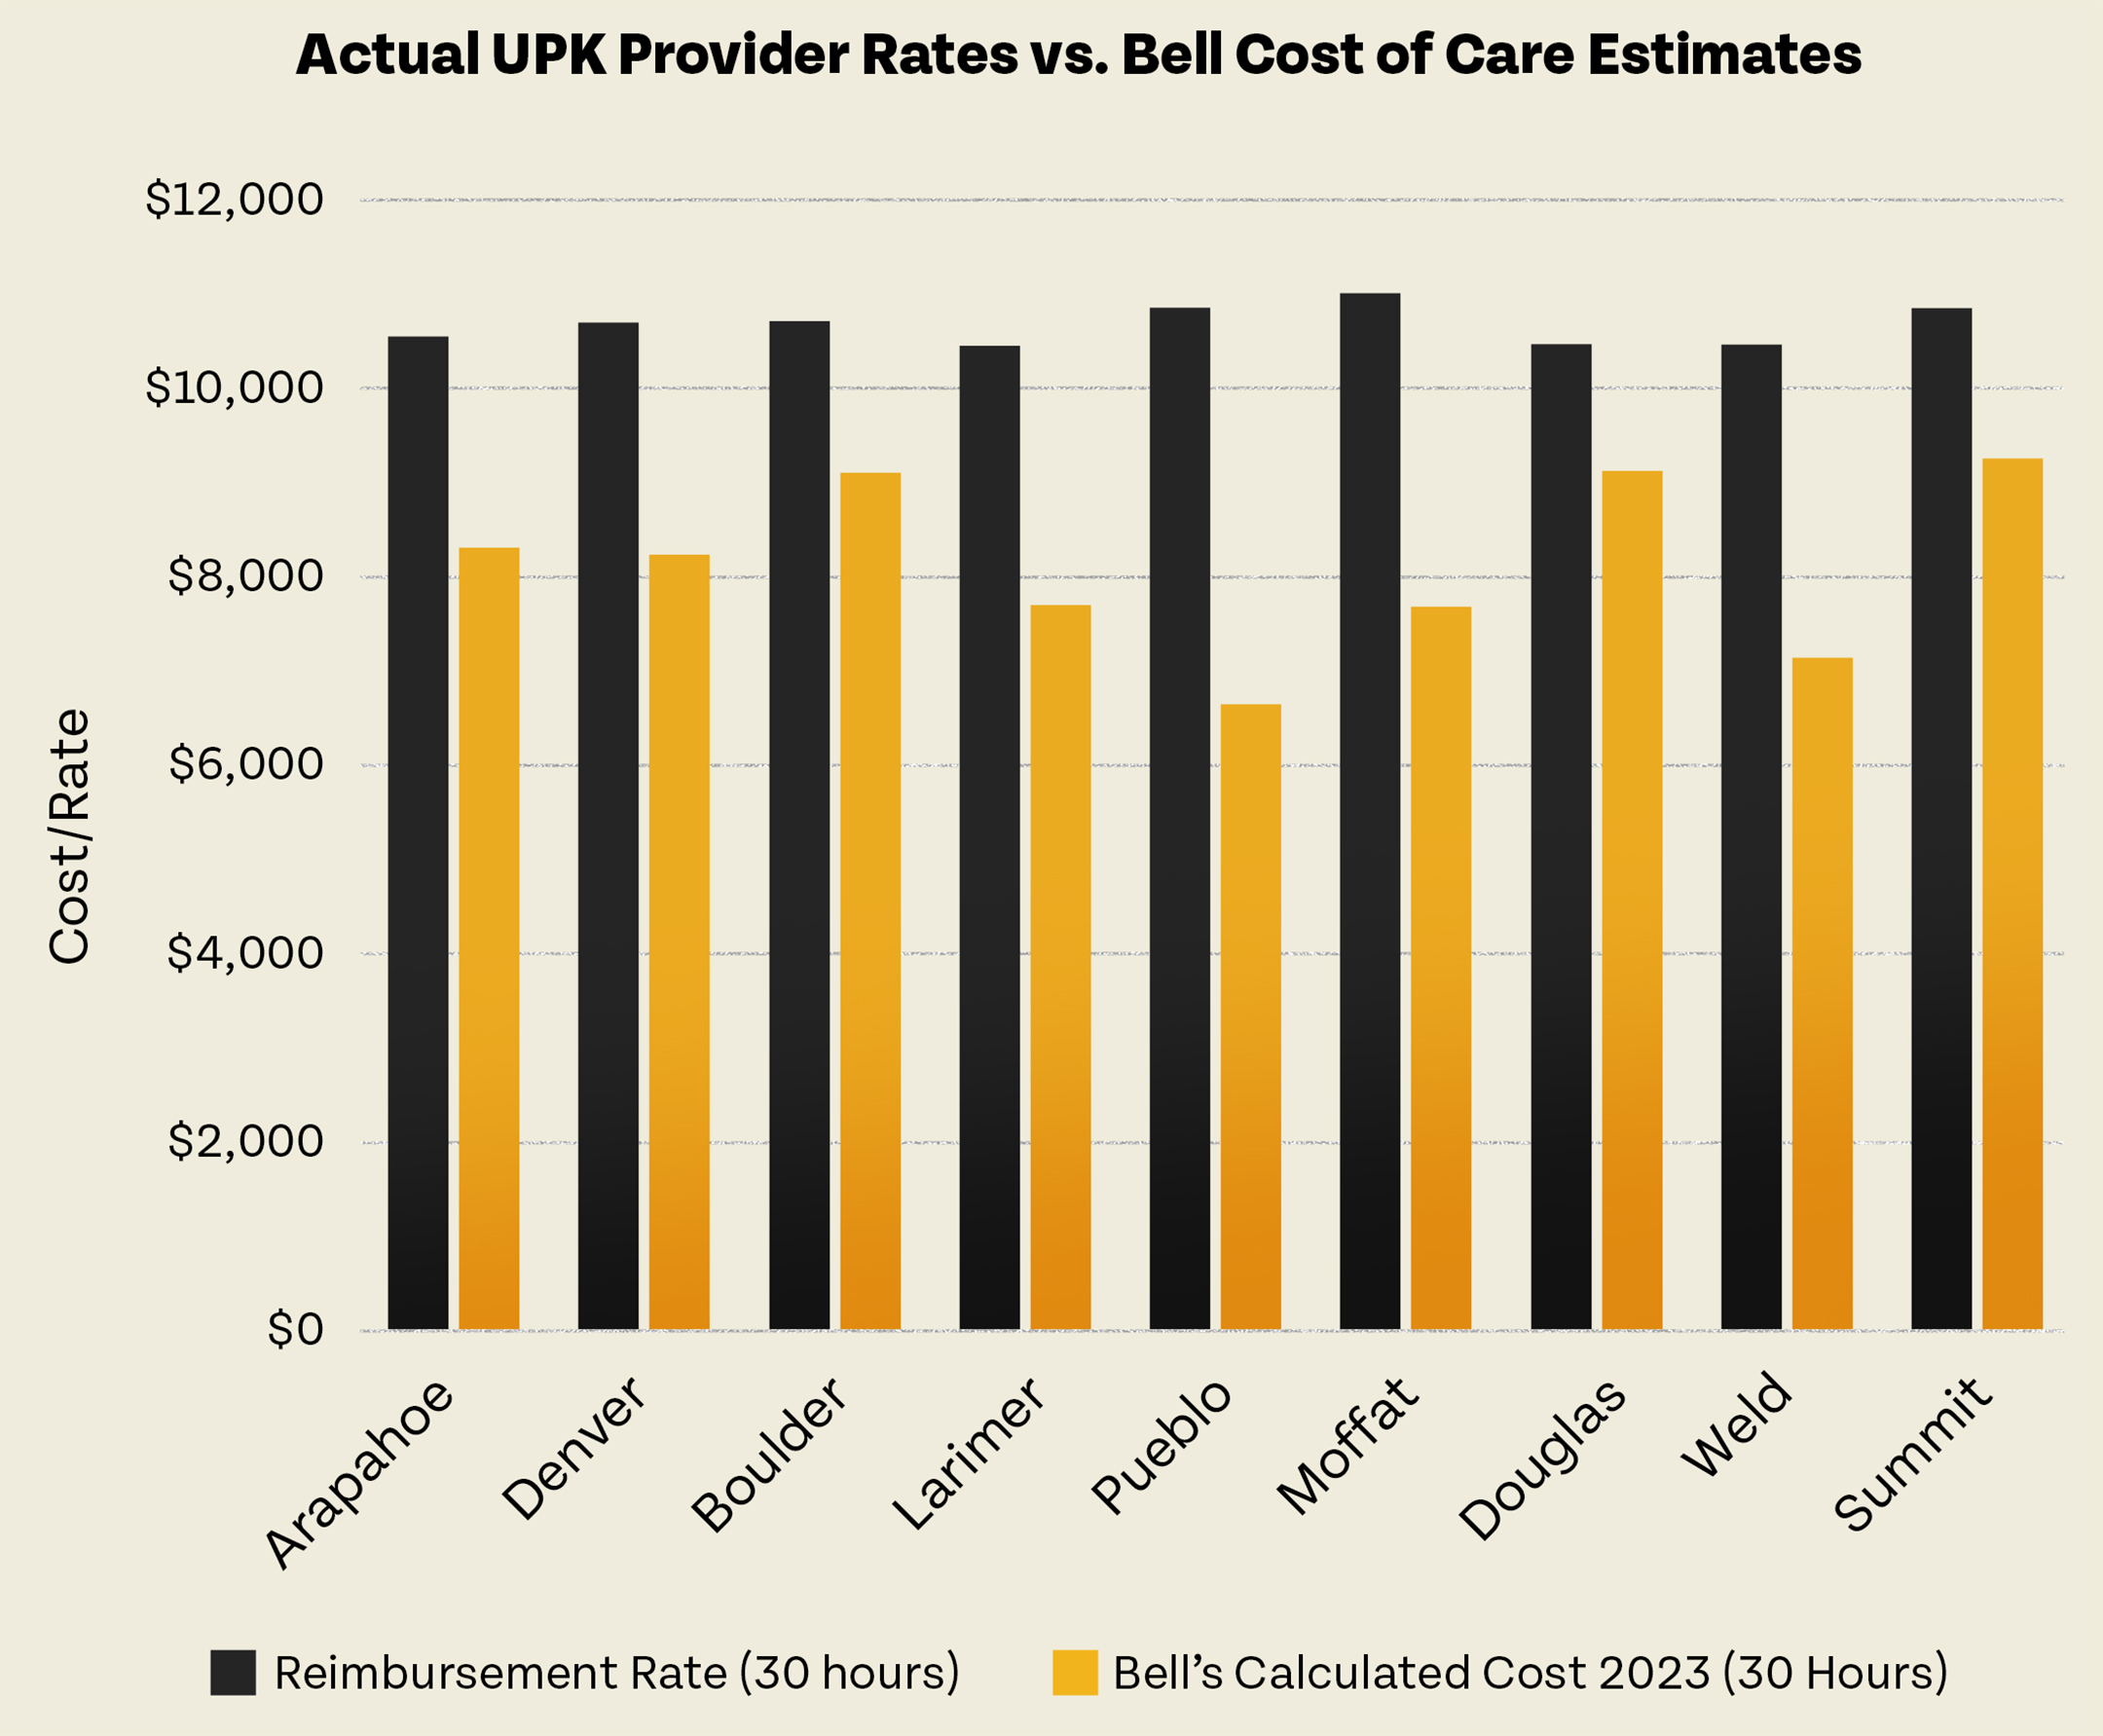 Graph titled "Actual UPK Provider Rates vs. Bell Cost of Care Estimates"